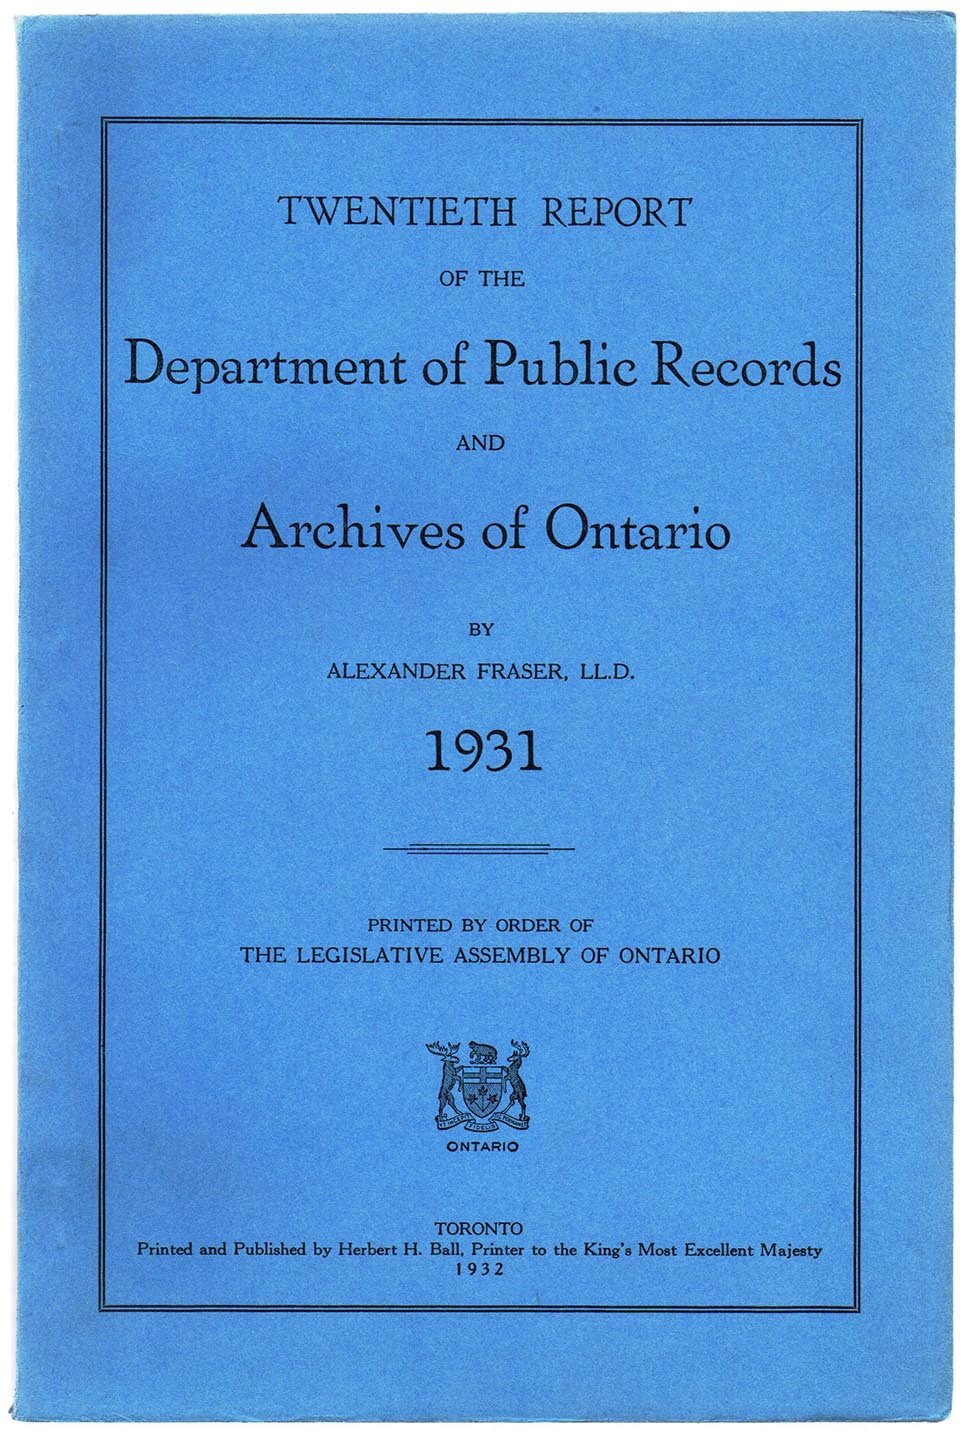 Twentieth Report of the Department of Public Records and Archives of Ontario, 1931